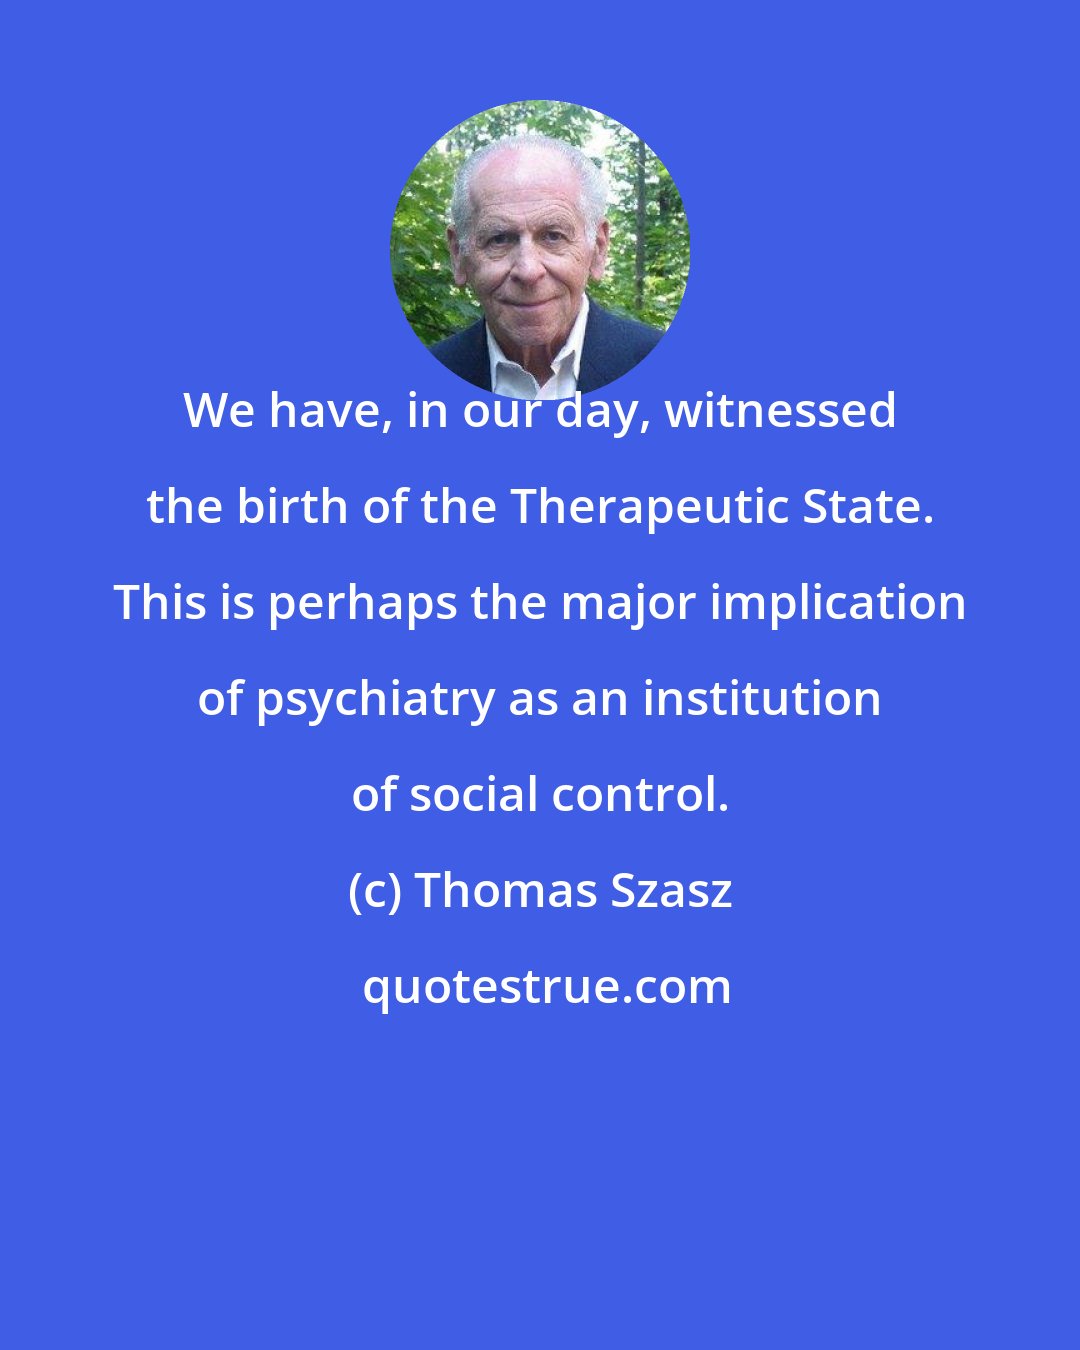 Thomas Szasz: We have, in our day, witnessed the birth of the Therapeutic State. This is perhaps the major implication of psychiatry as an institution of social control.